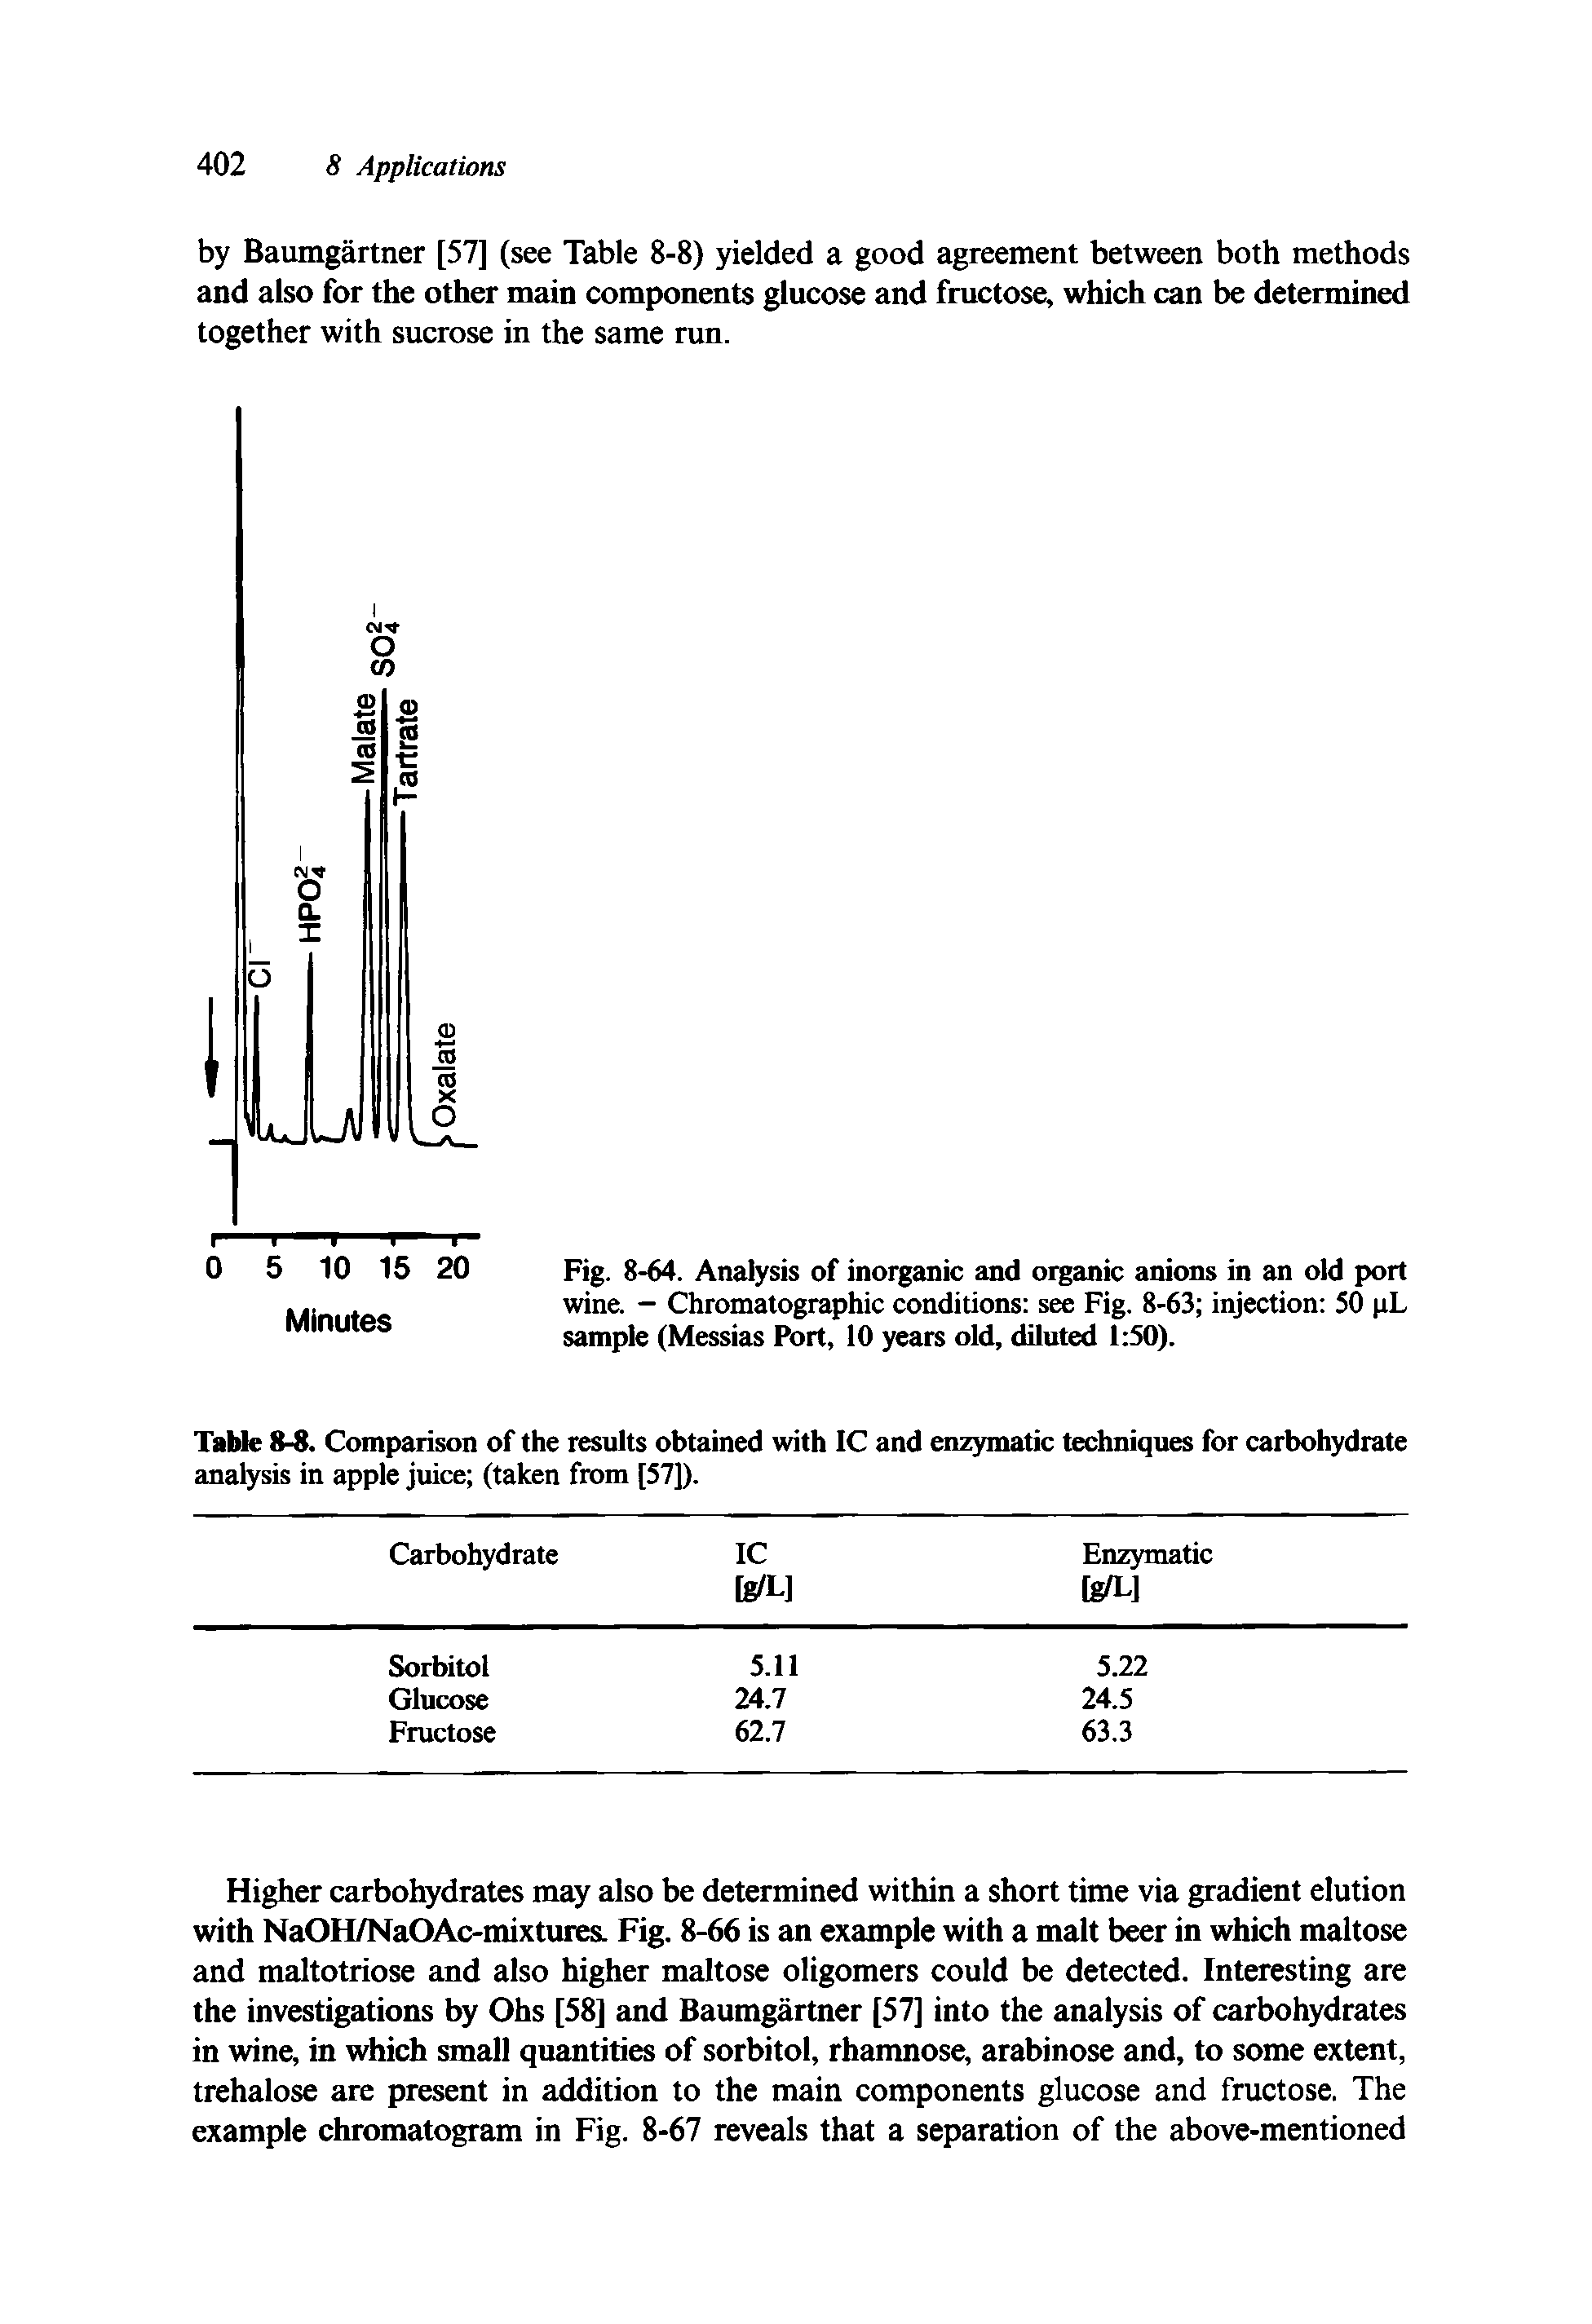 Table 8-8. Comparison of the results obtained with IC and enzymatic techniques for carbohydrate analysis in apple juice (taken from [57]).